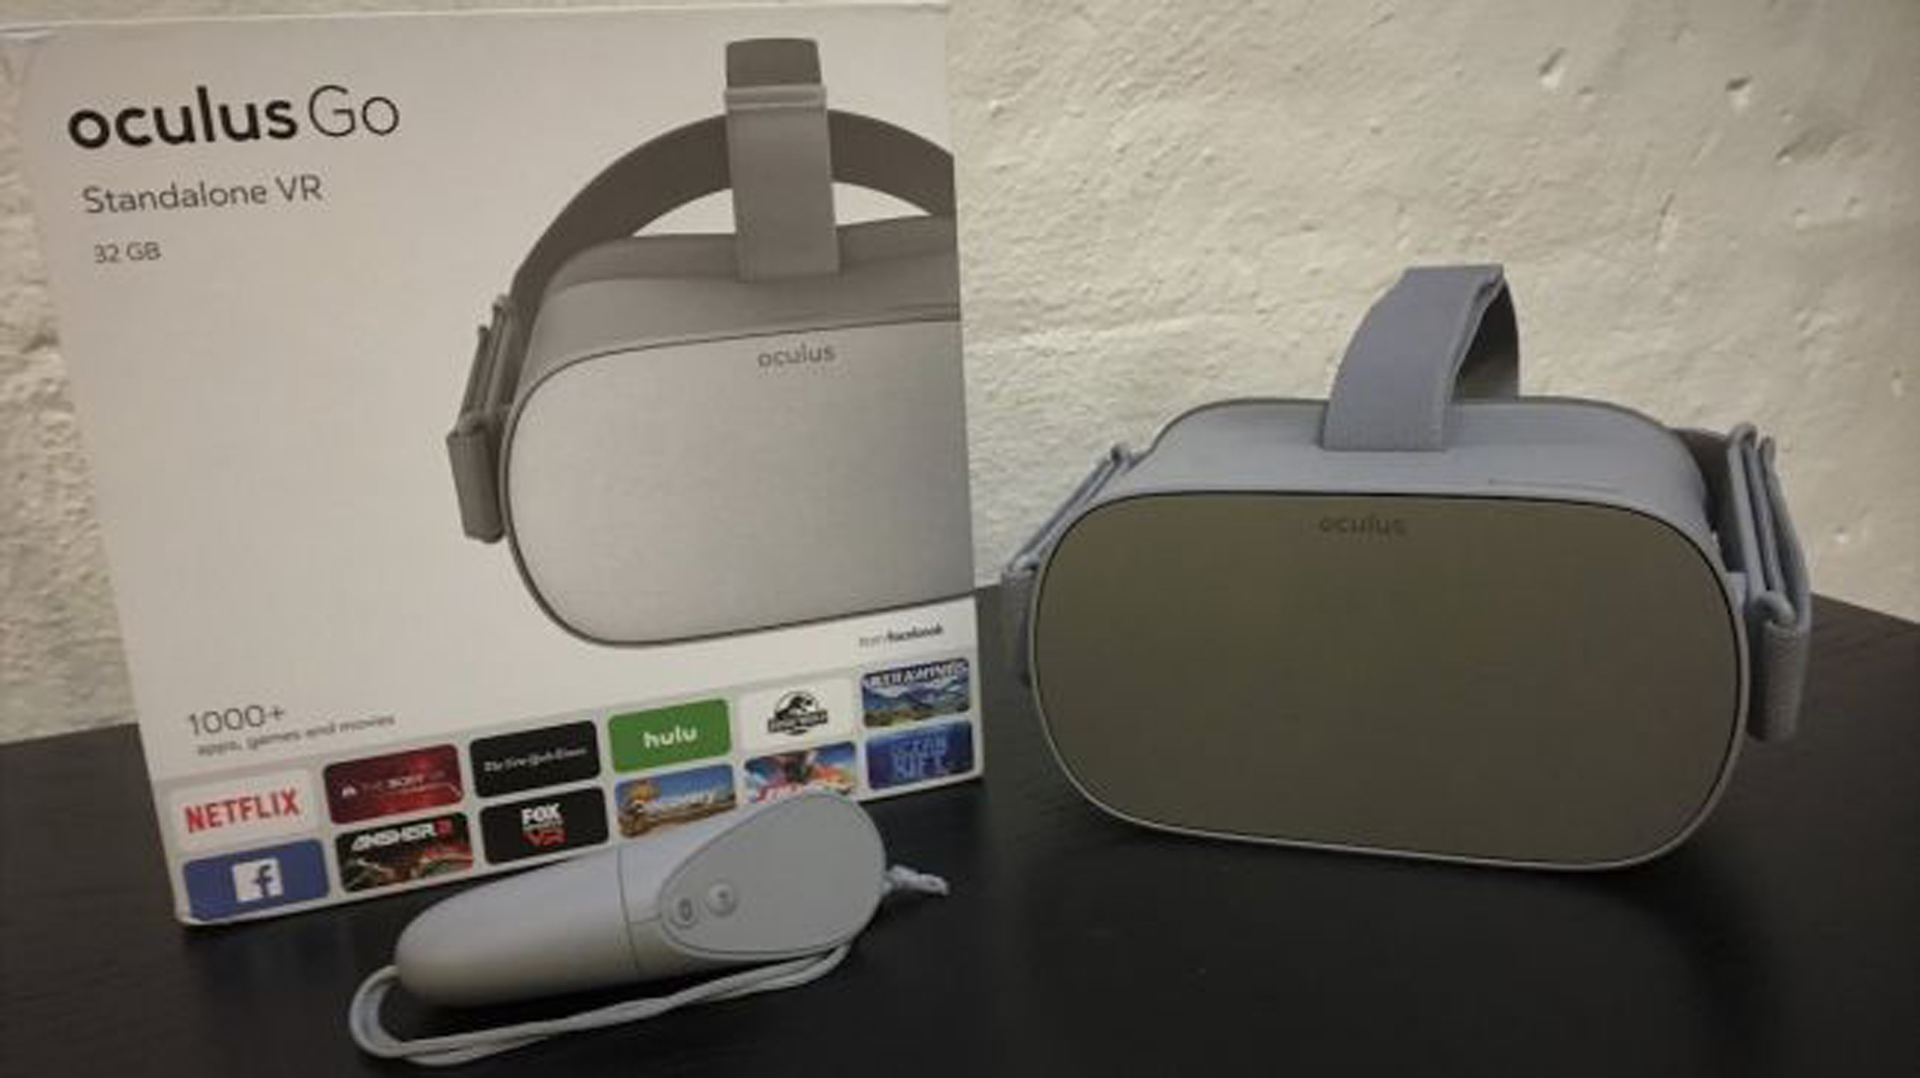 Oculus Go Dev Kit Images Show the Headset to Be Near Consumer